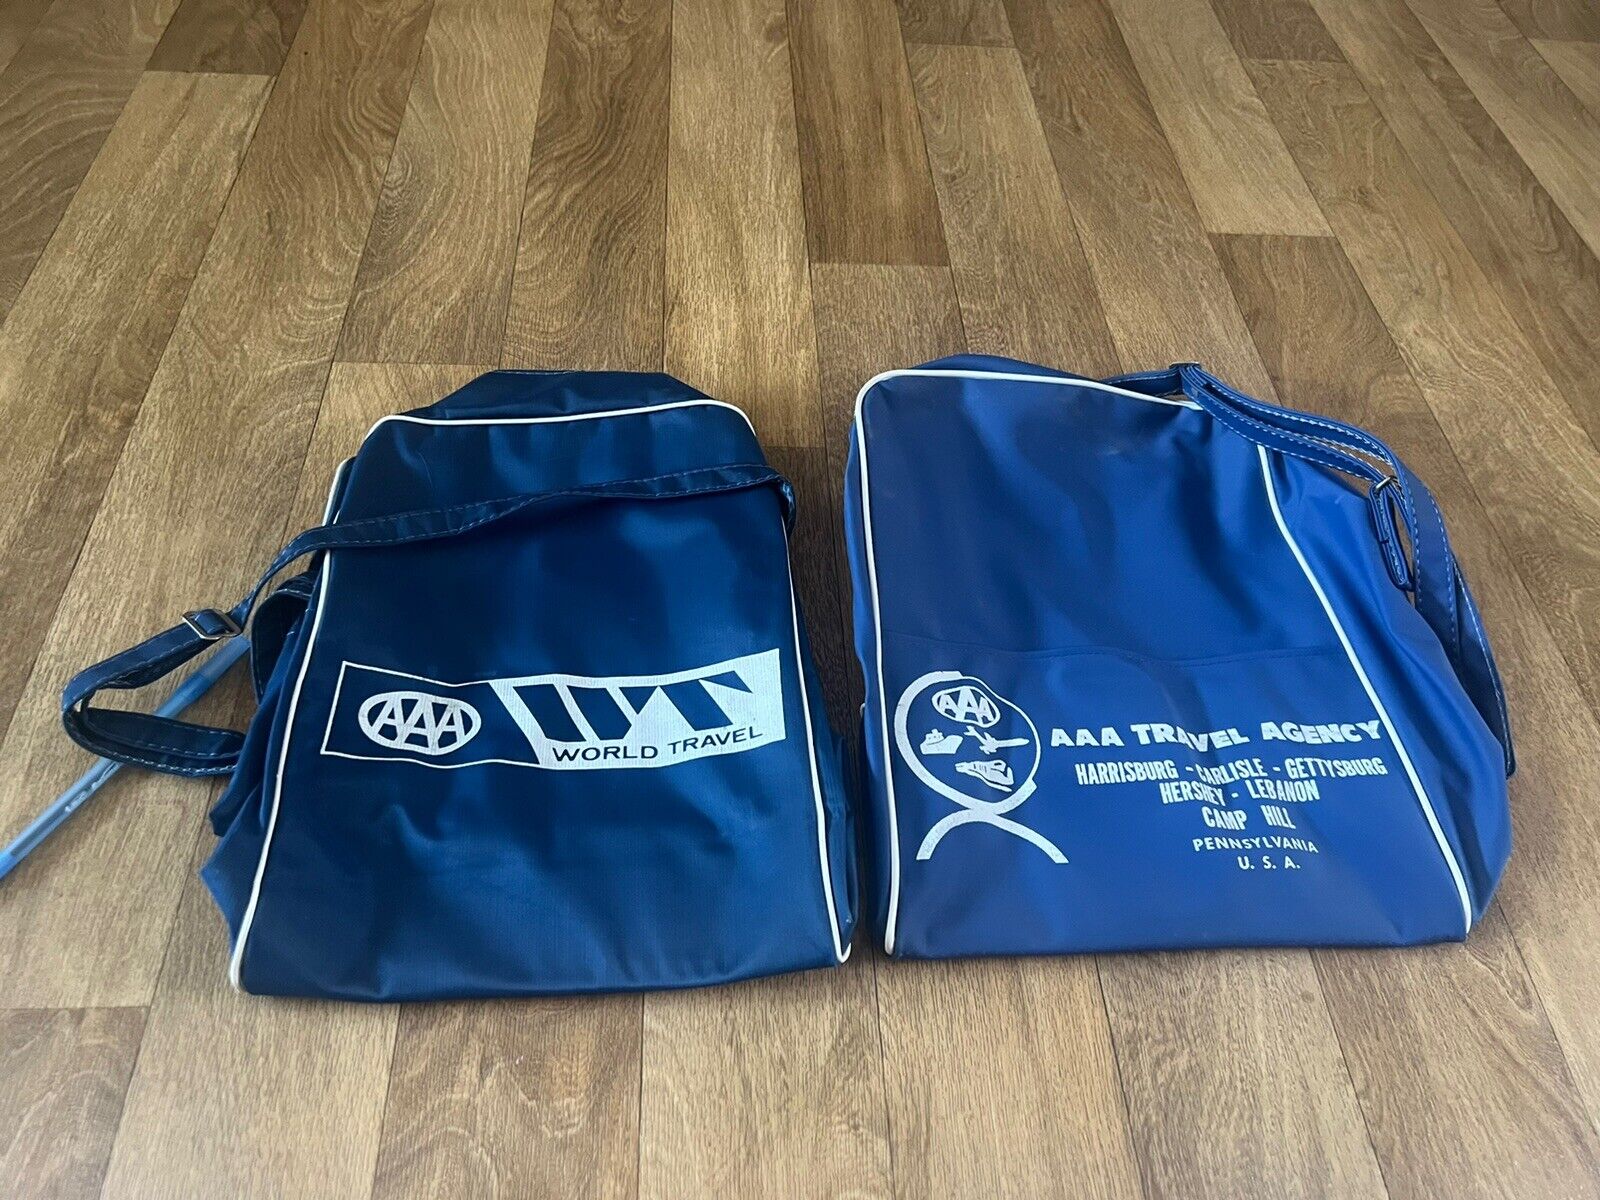 (2) AAA World Travel Camp Hill Tote Bags Blue Clean